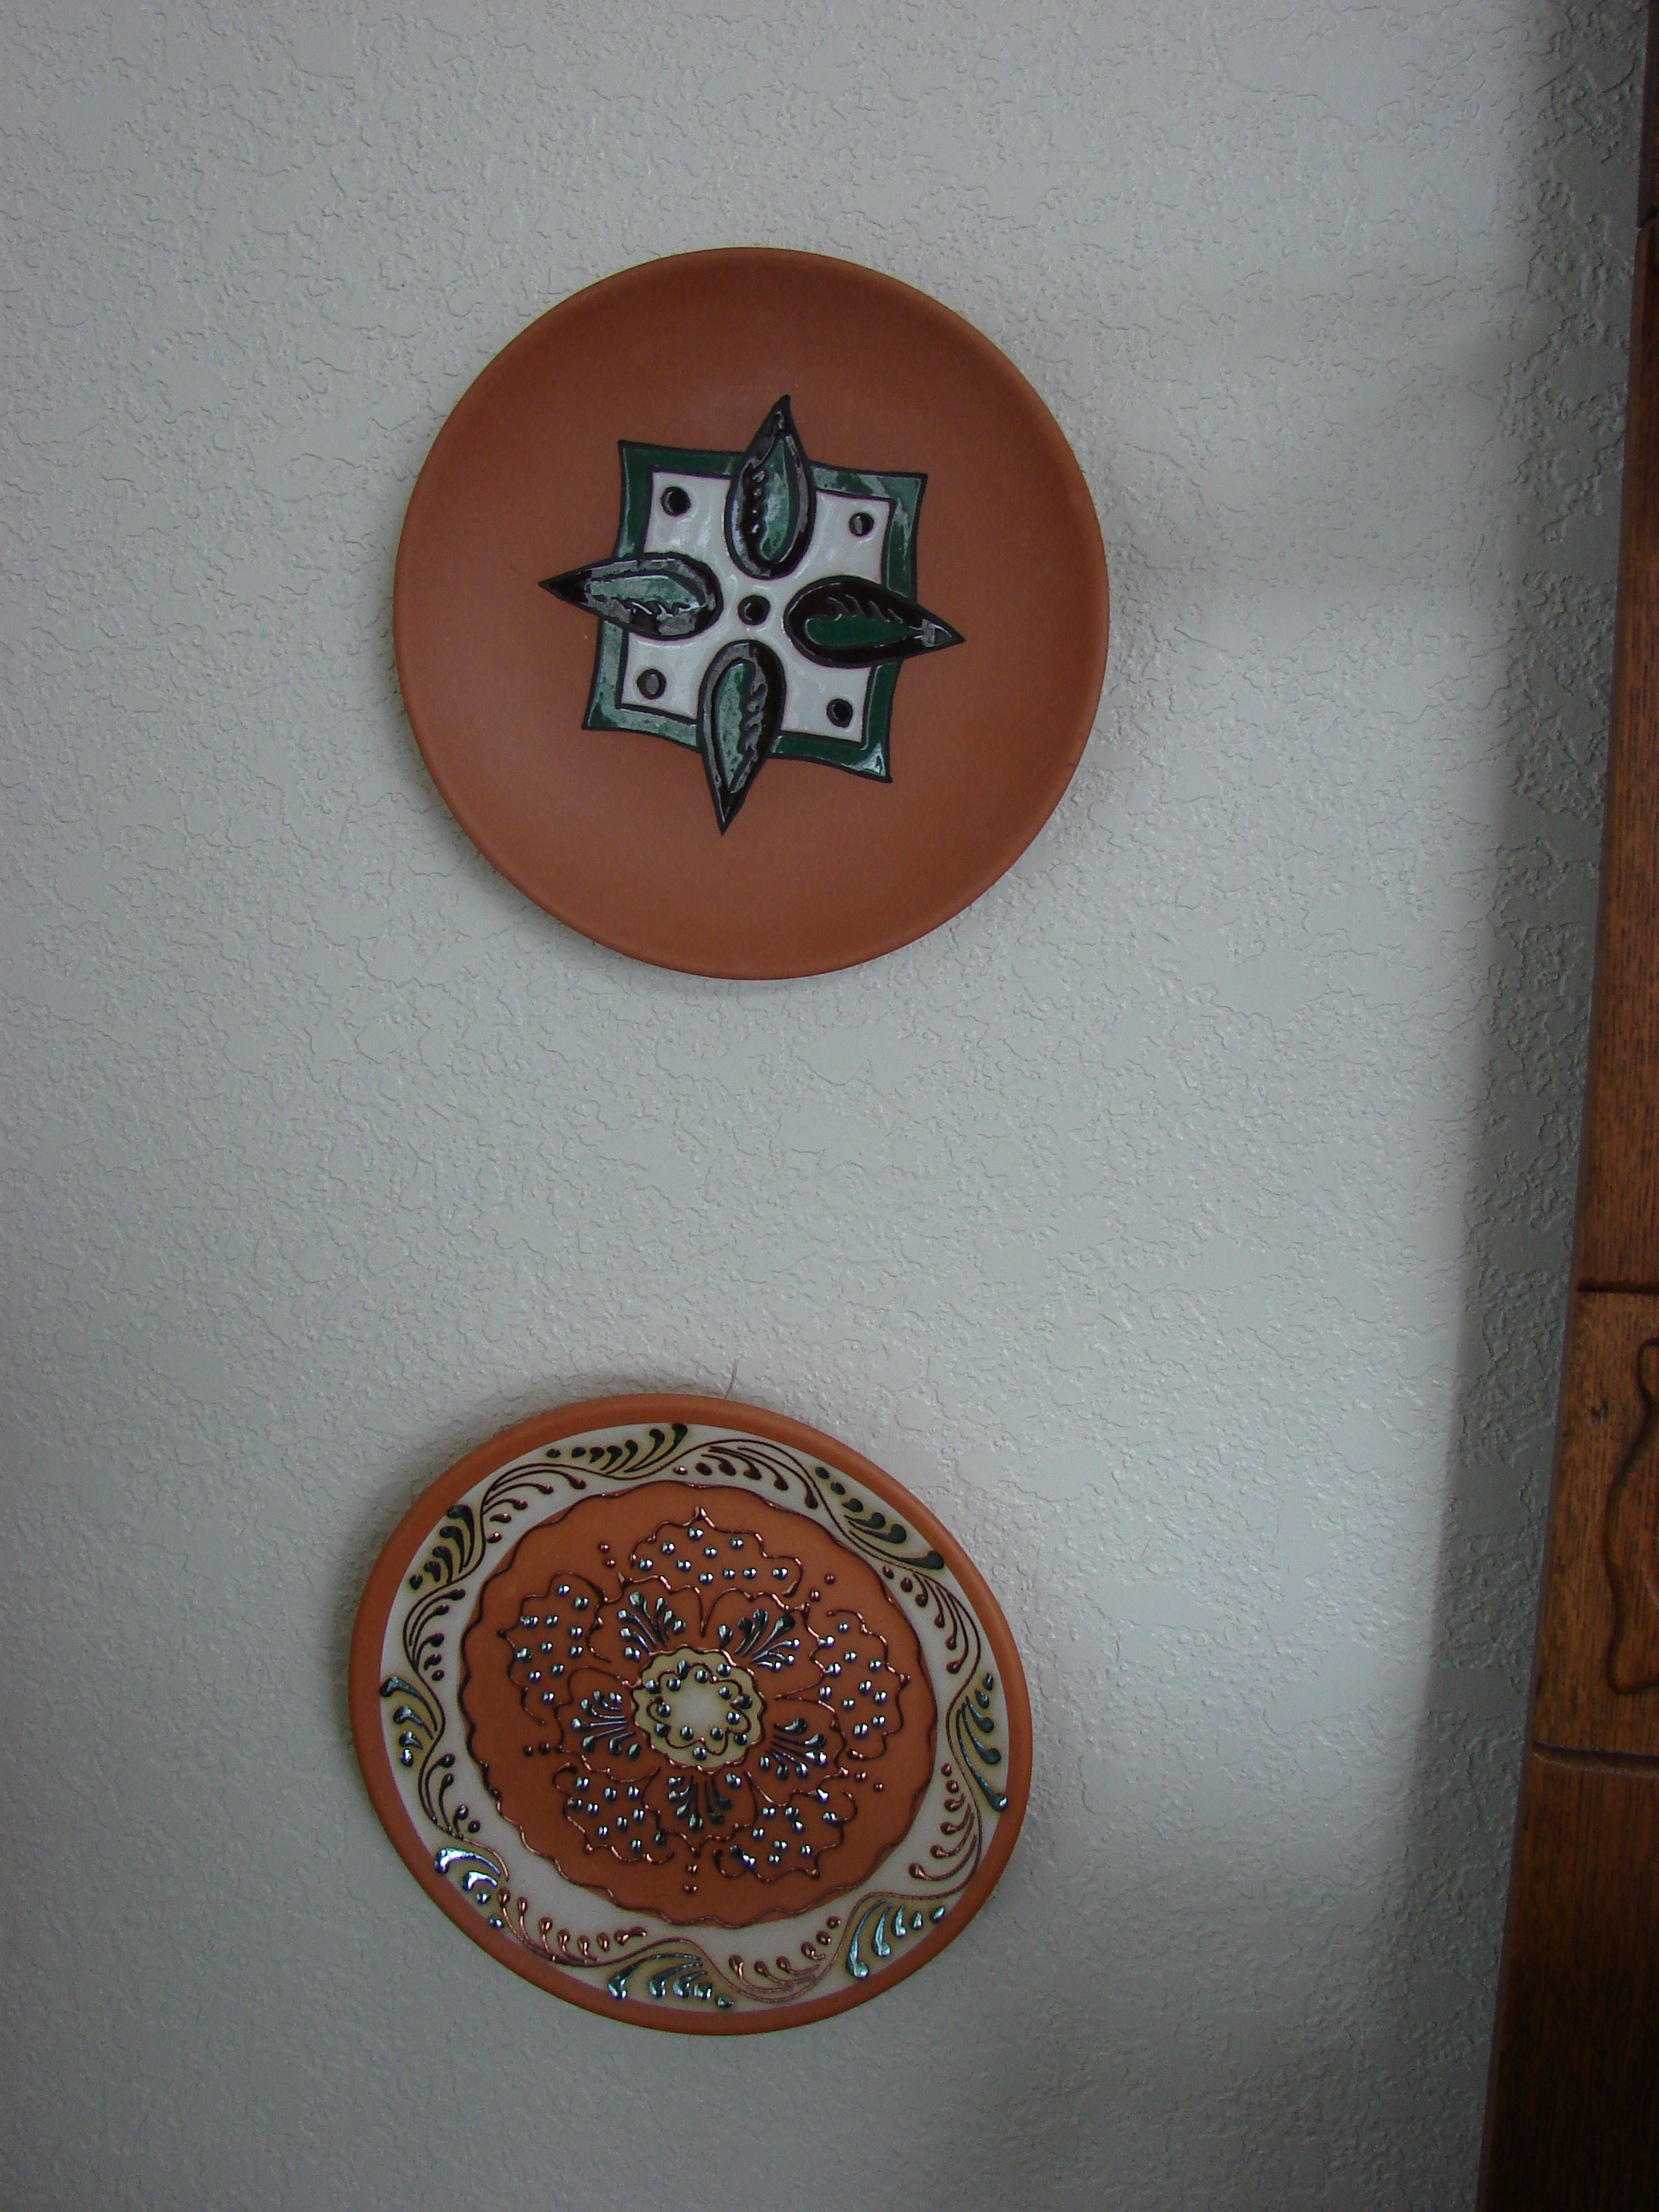 Plates.  I think they're both from Guadix, Spain.